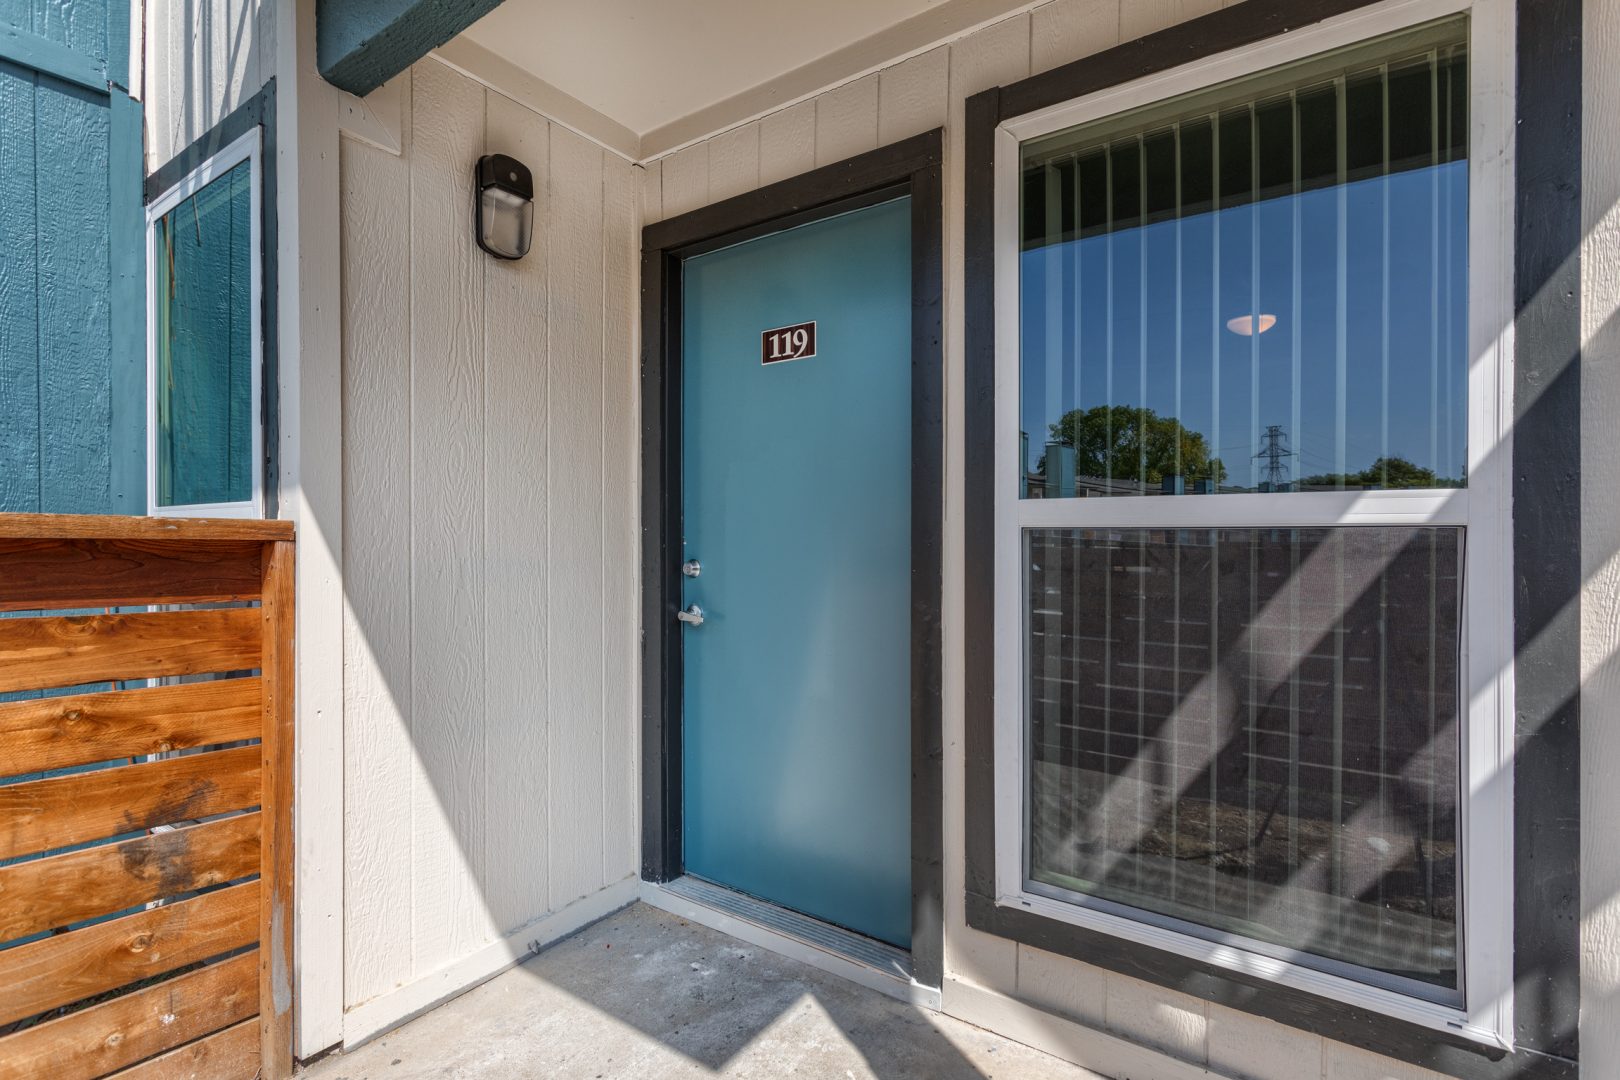 Picture of a blue apartment entryway door and window with a small section of cedar fence showing.